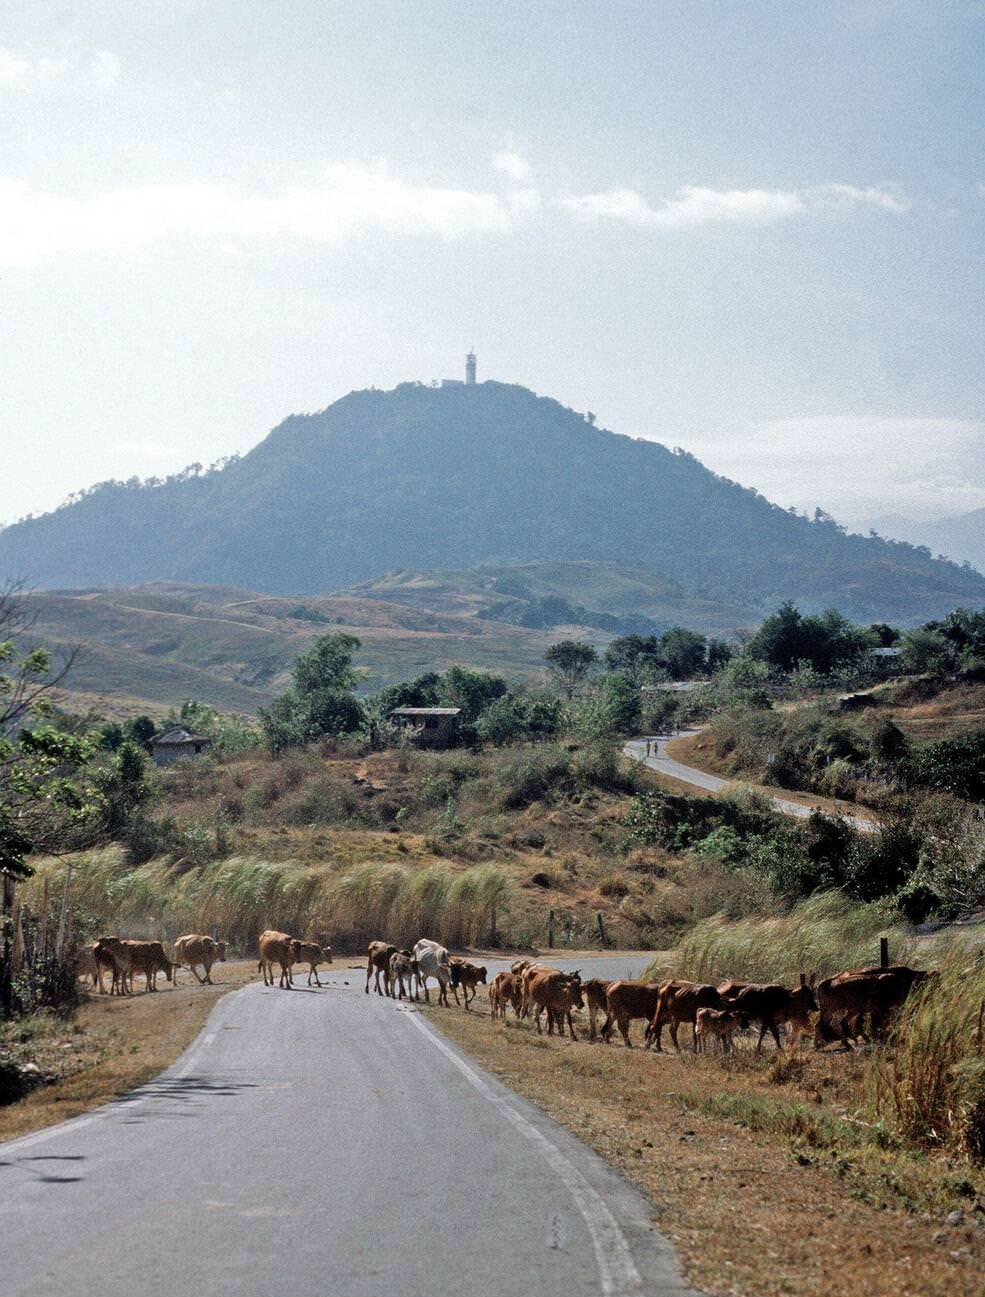 Mount Santa Rita, with the U.S. naval station and cattle crossing, 1981